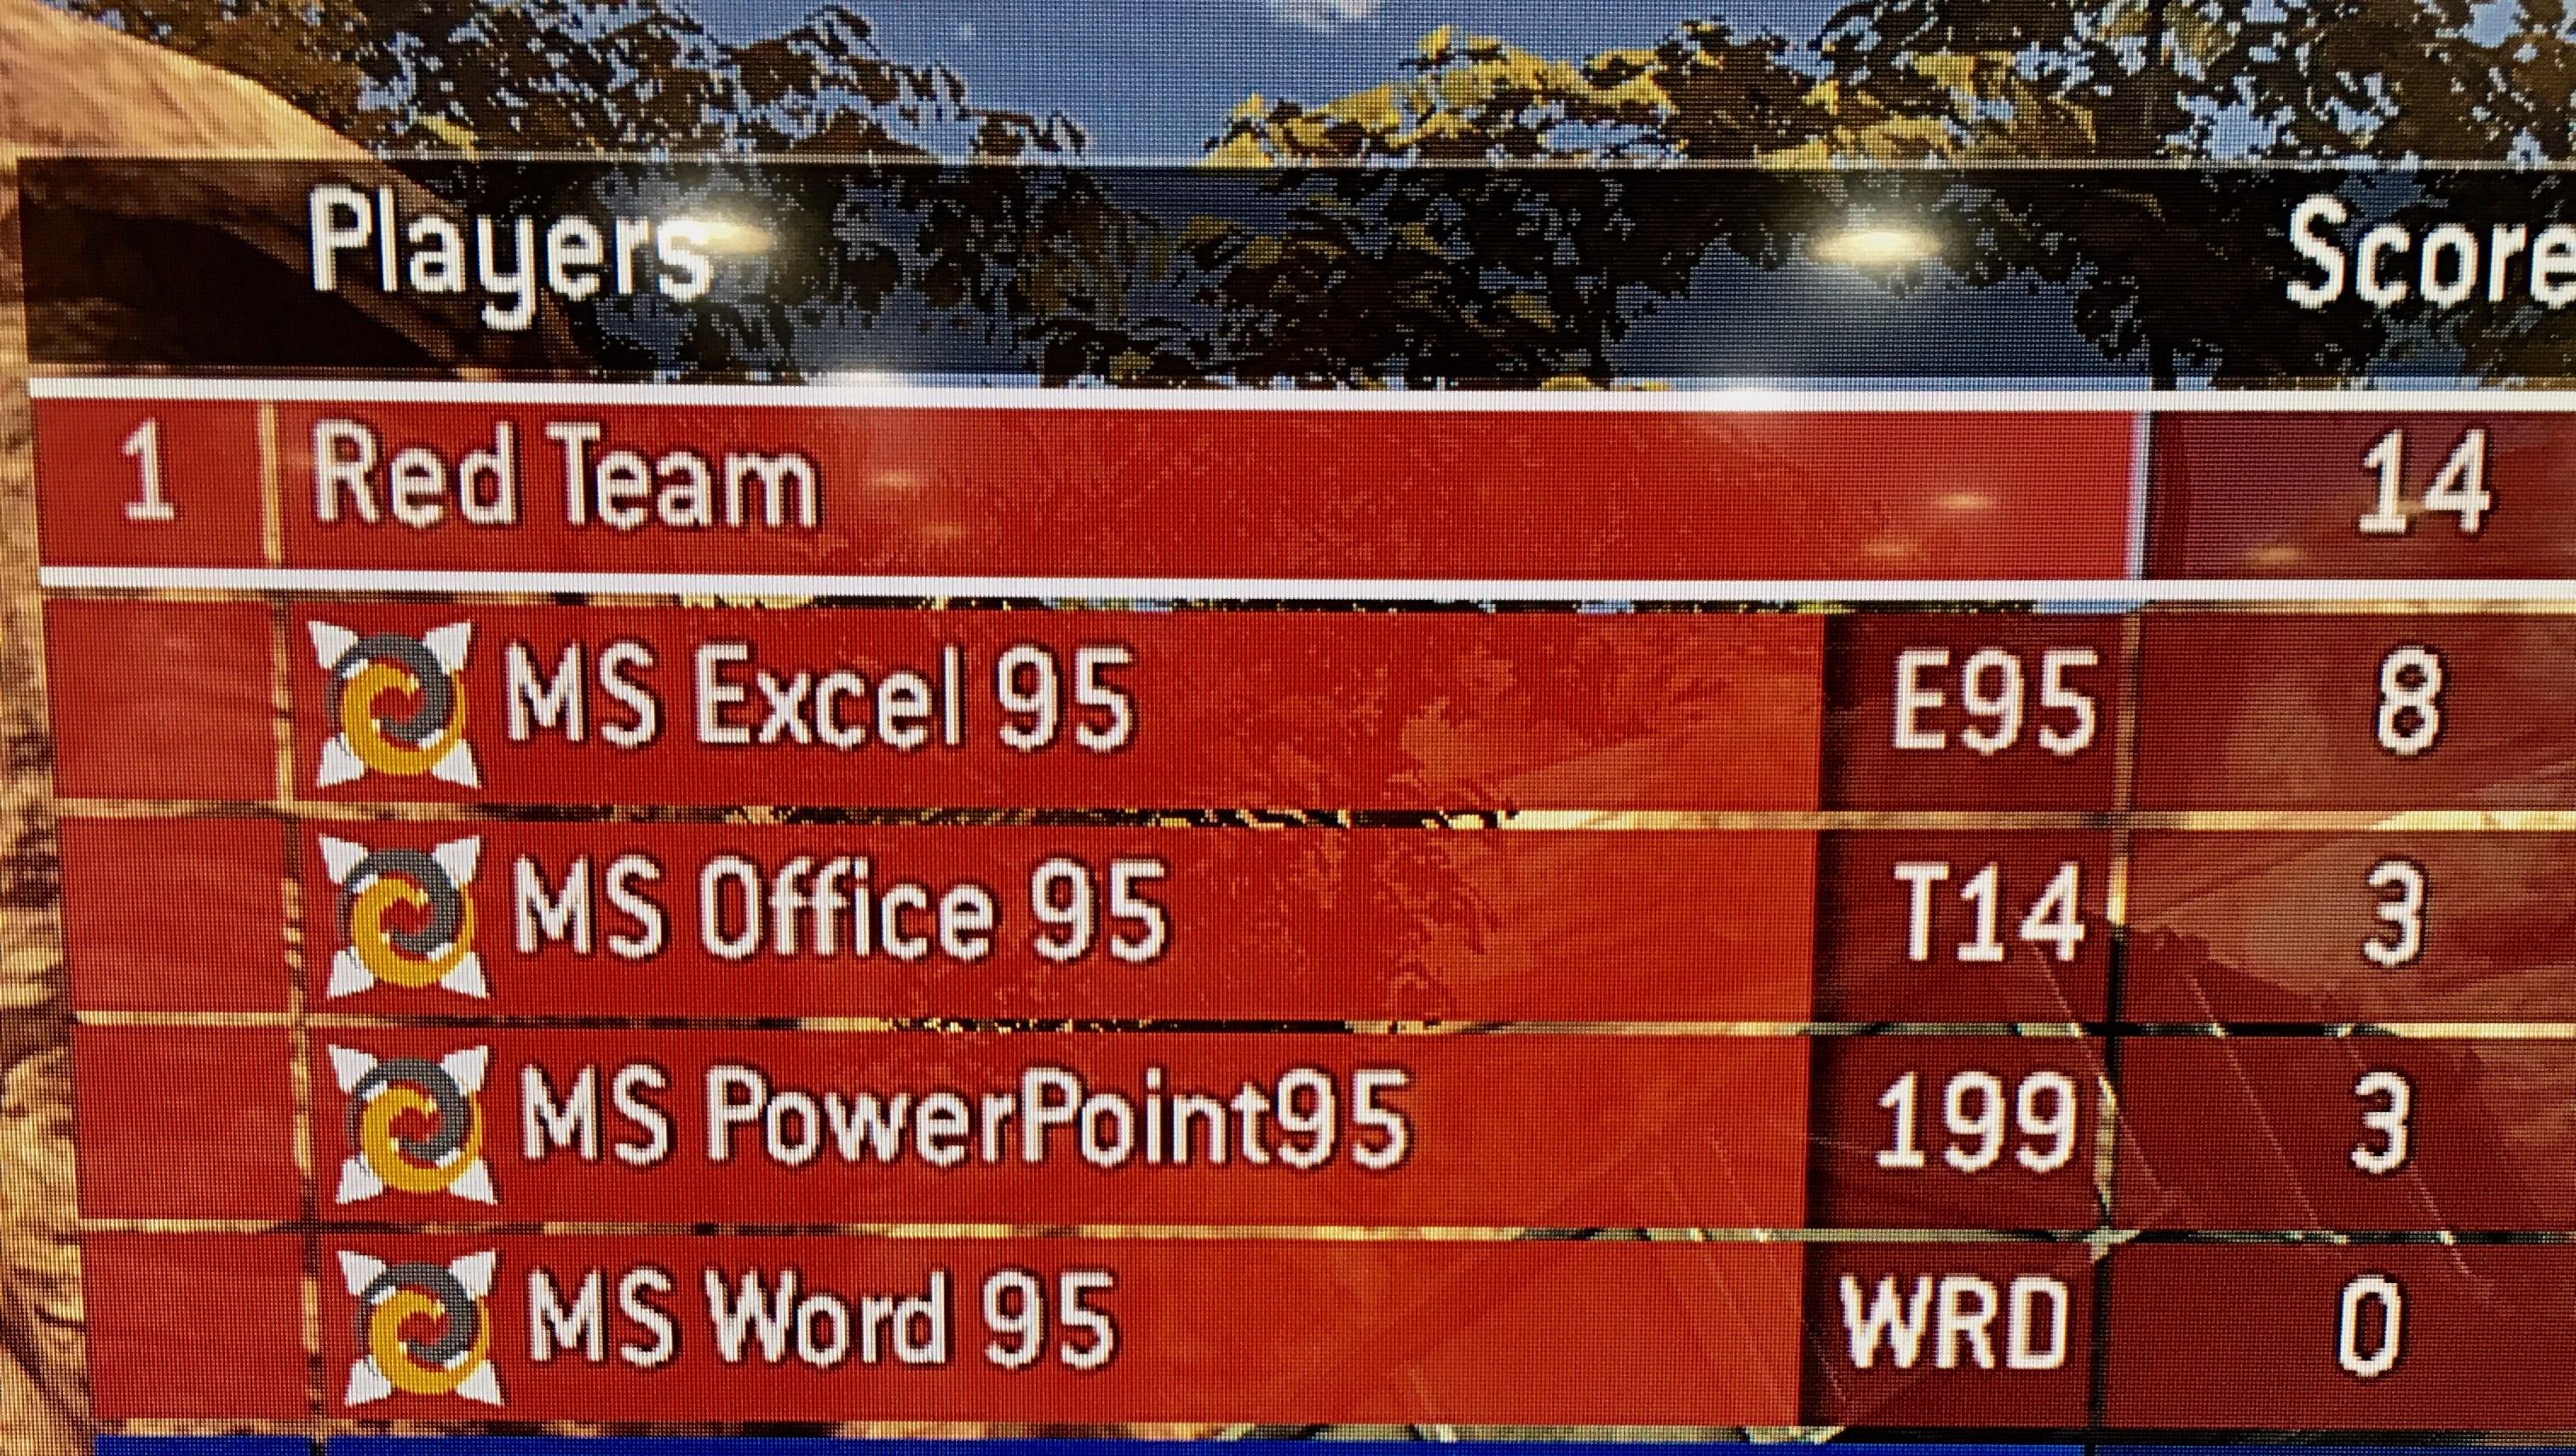 brick - Score 14 E95 Players 1 Red Team Ms Excel 95 Ms Office 95 Vums PowerPoint95 Ms Word 95 T14 199 Wrd